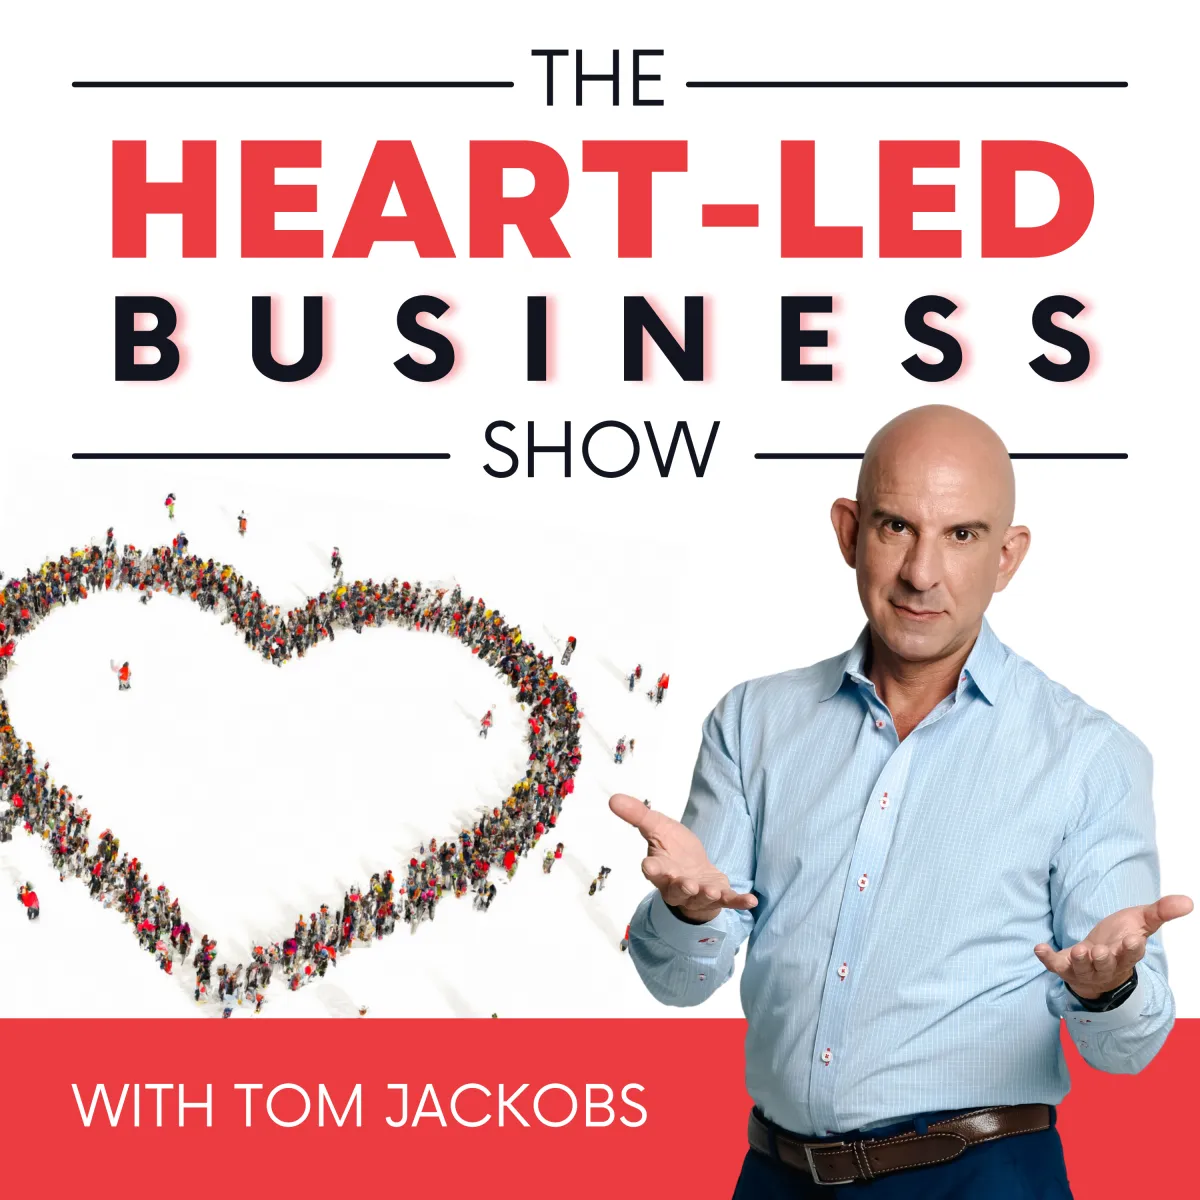 The Heart Led Business Show